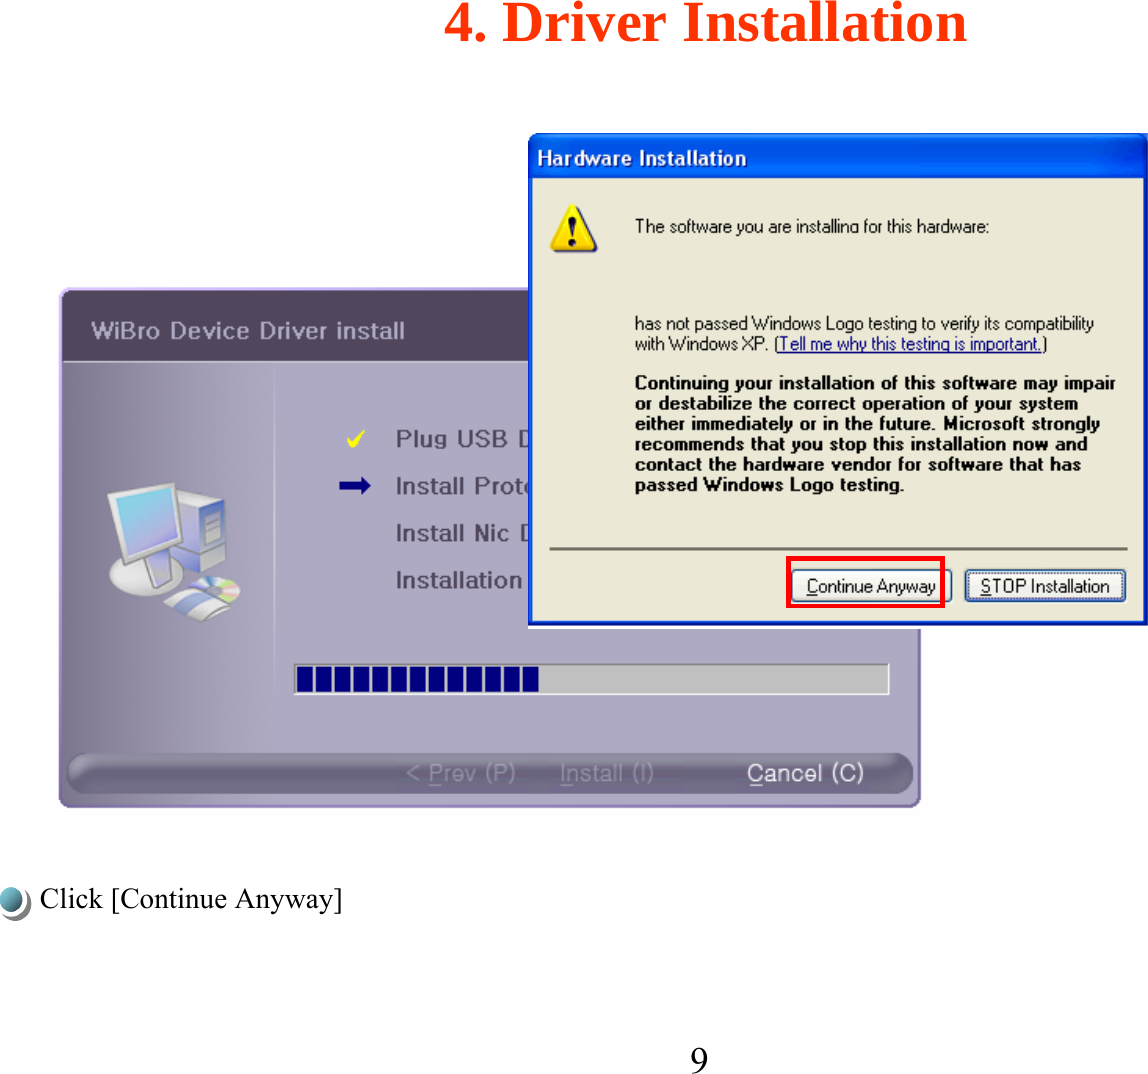 9Click [Continue Anyway] 4. Driver Installation